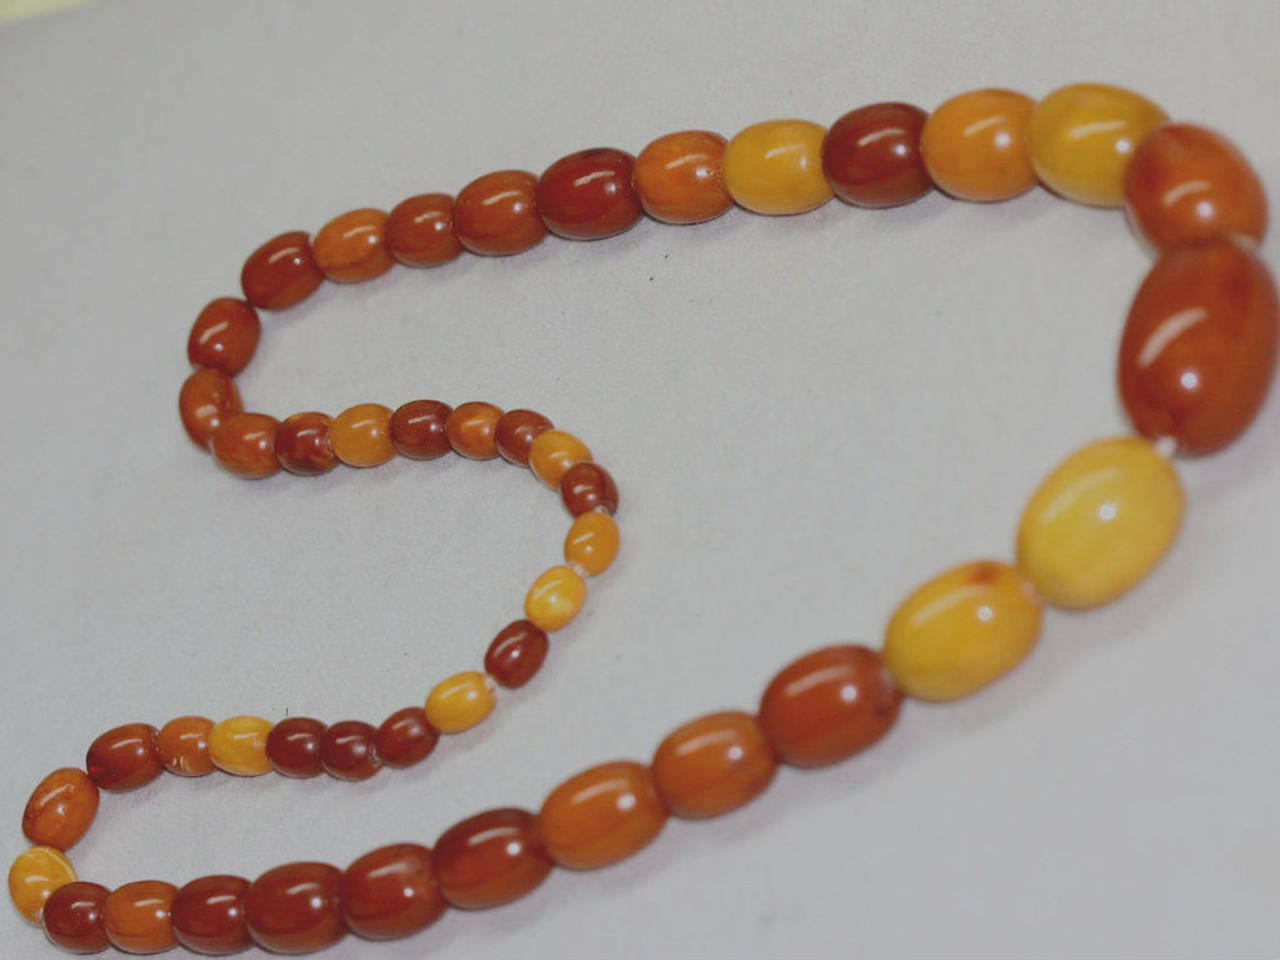 Details about   20g Natural Baltic Amber oval beads Butterscotch Egg Yolk yellow orange amber 